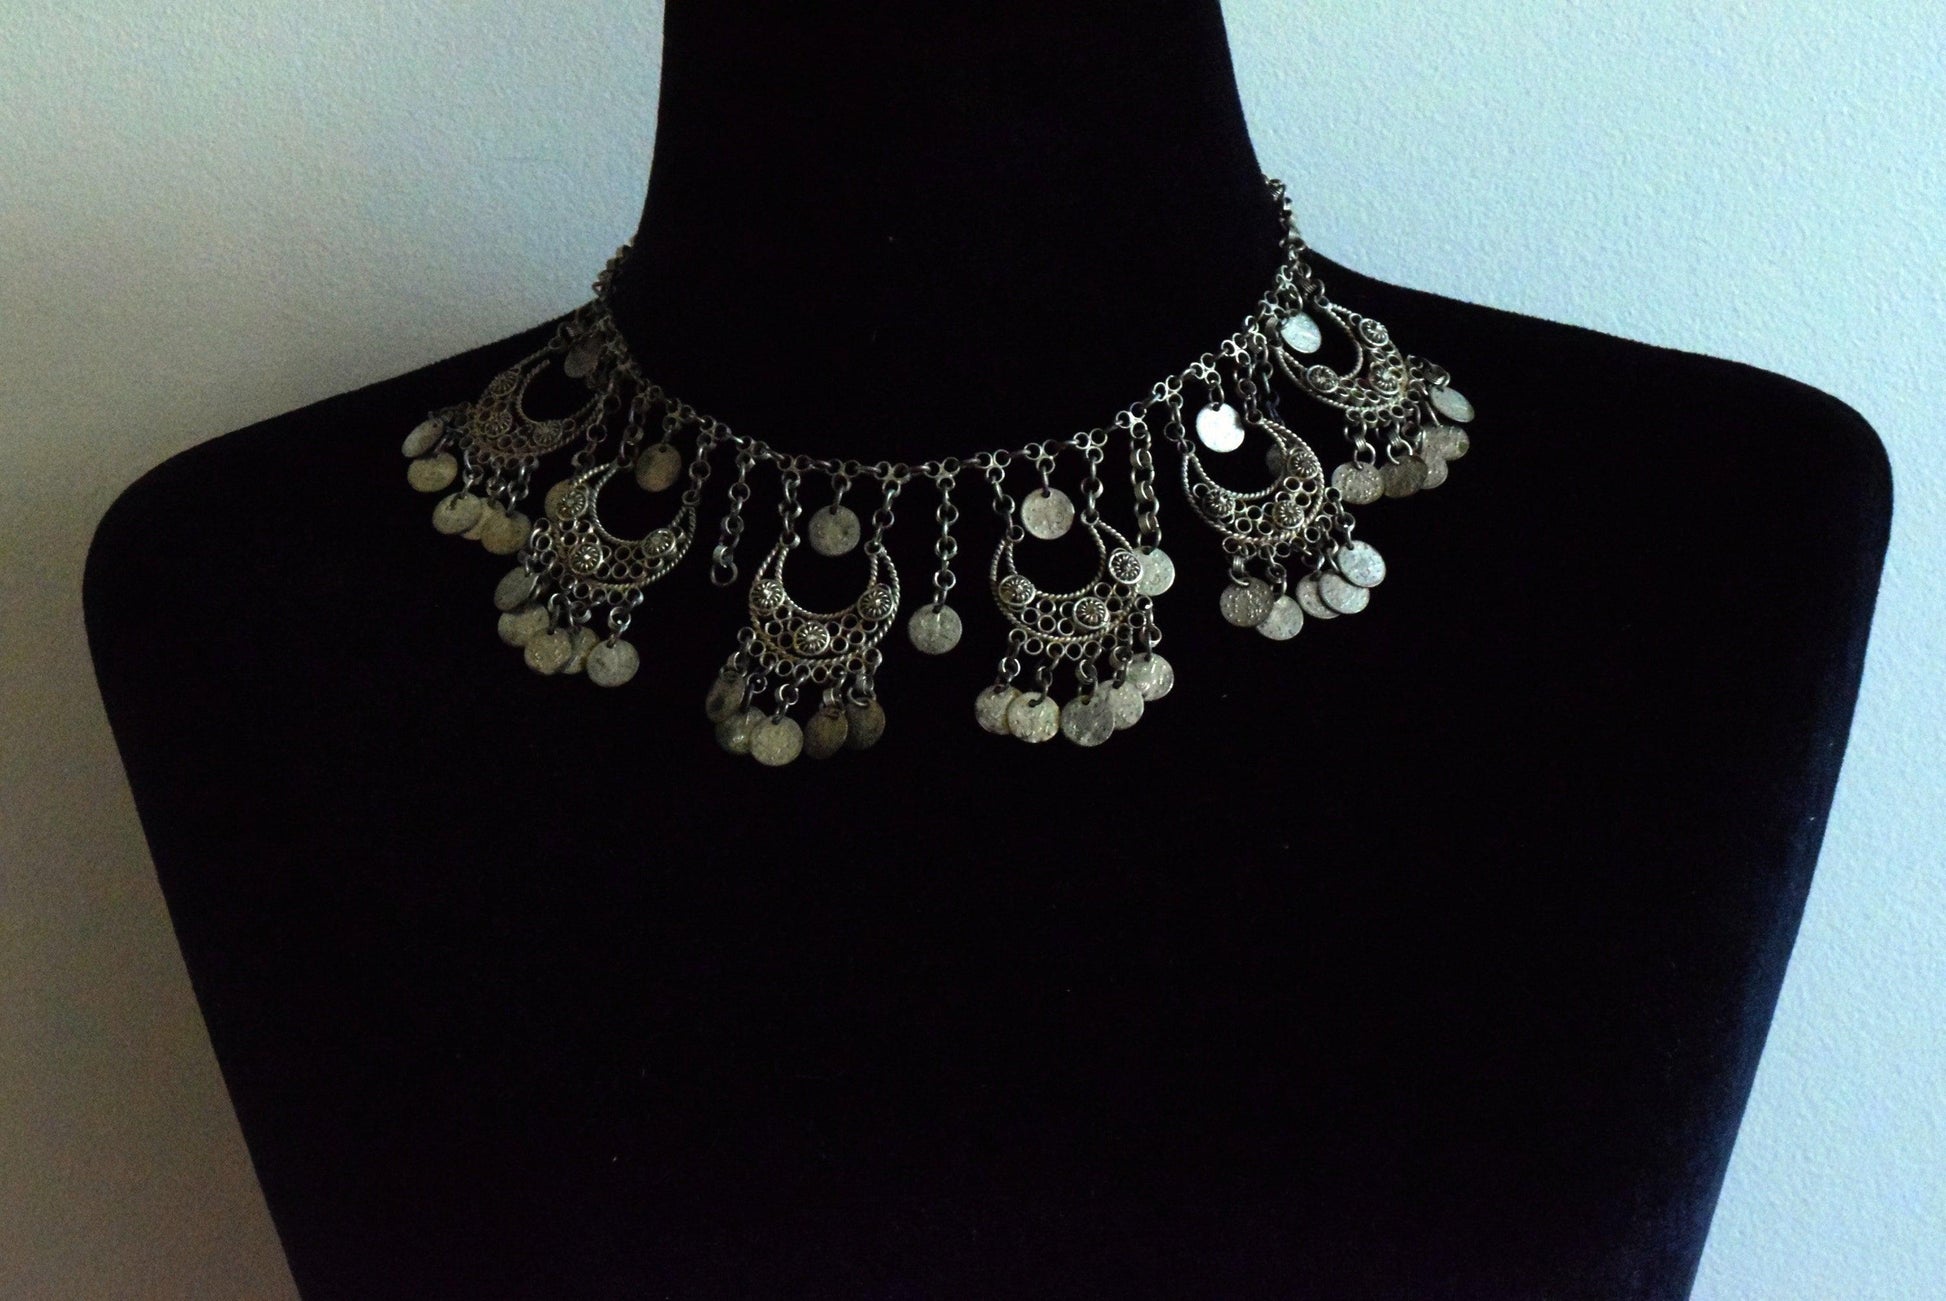 Vintage Turkish Folk Necklace with Faux Coins - Anteeka